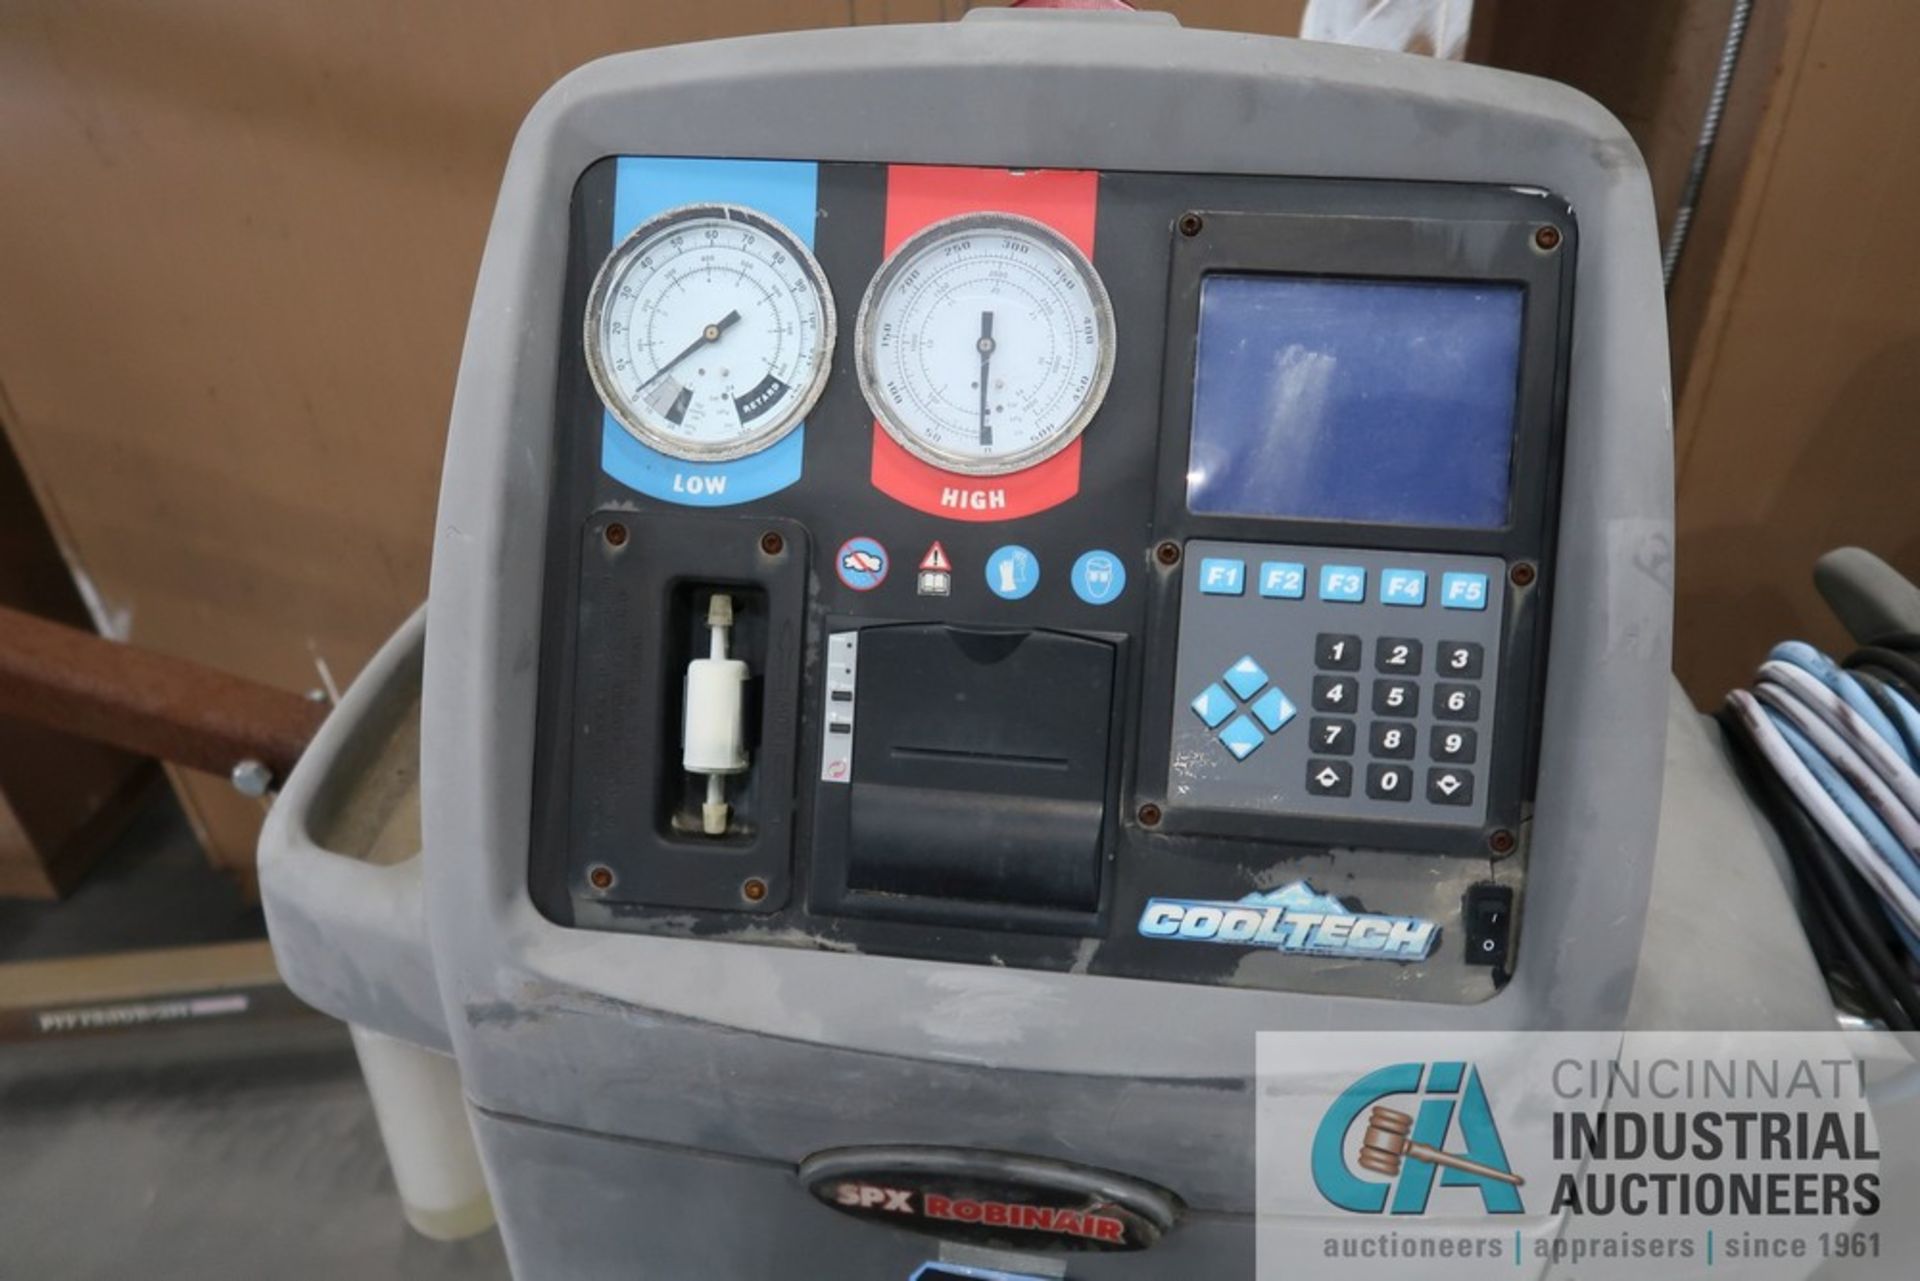 SPX/ROBINAIR COOLTECH REFRIGERANT RECOVERY, RECHARGING, AND RECYCLING STATION - Image 3 of 6